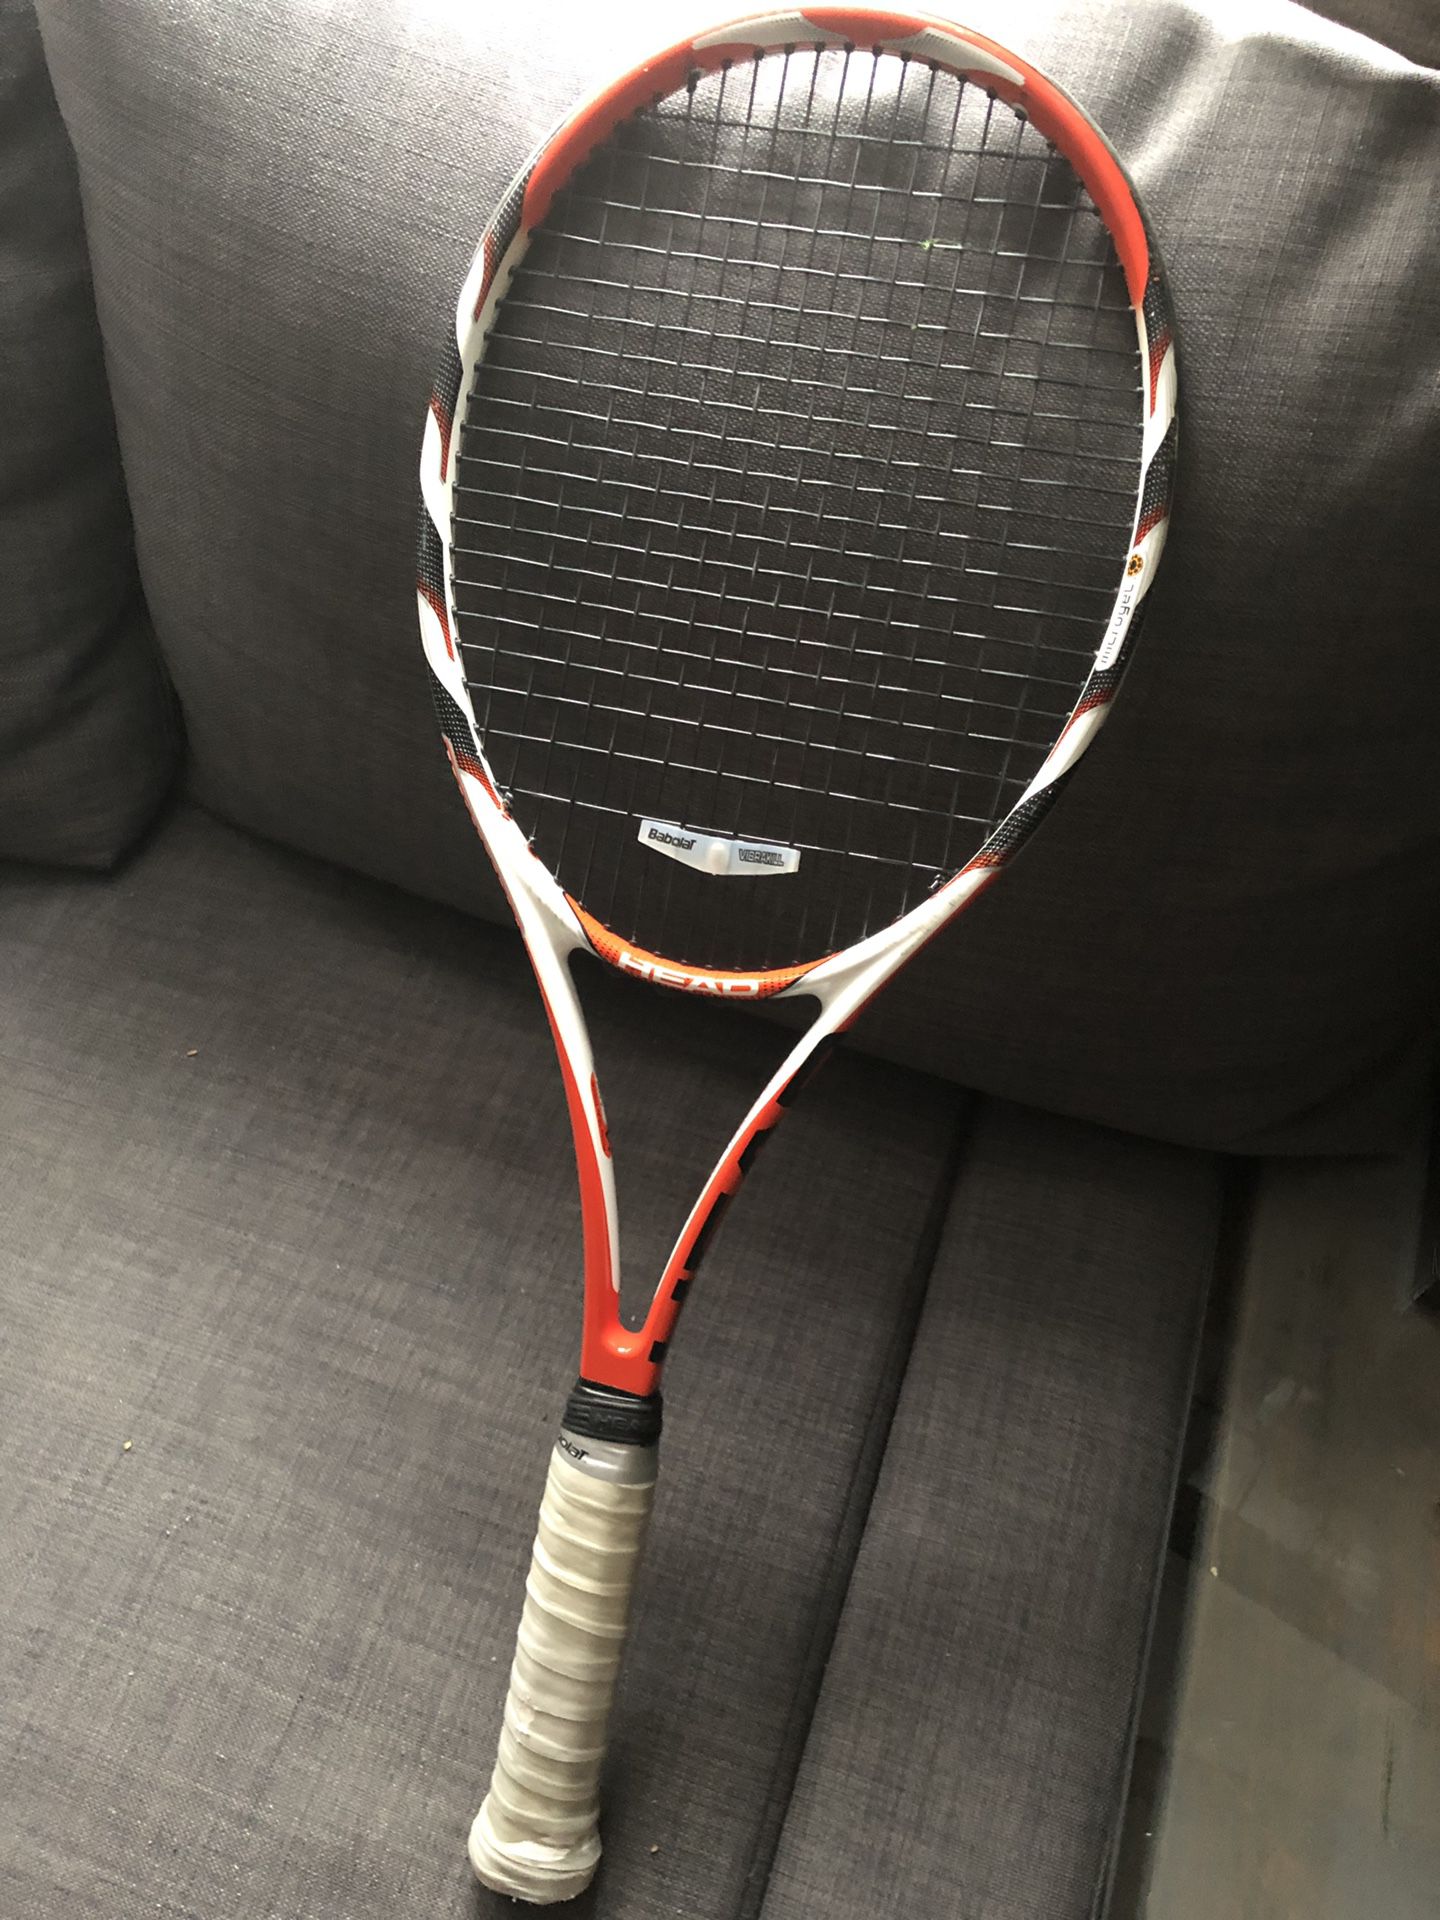 4 tennis racquets available. Rated 7 out of 10, new grips and priced separately